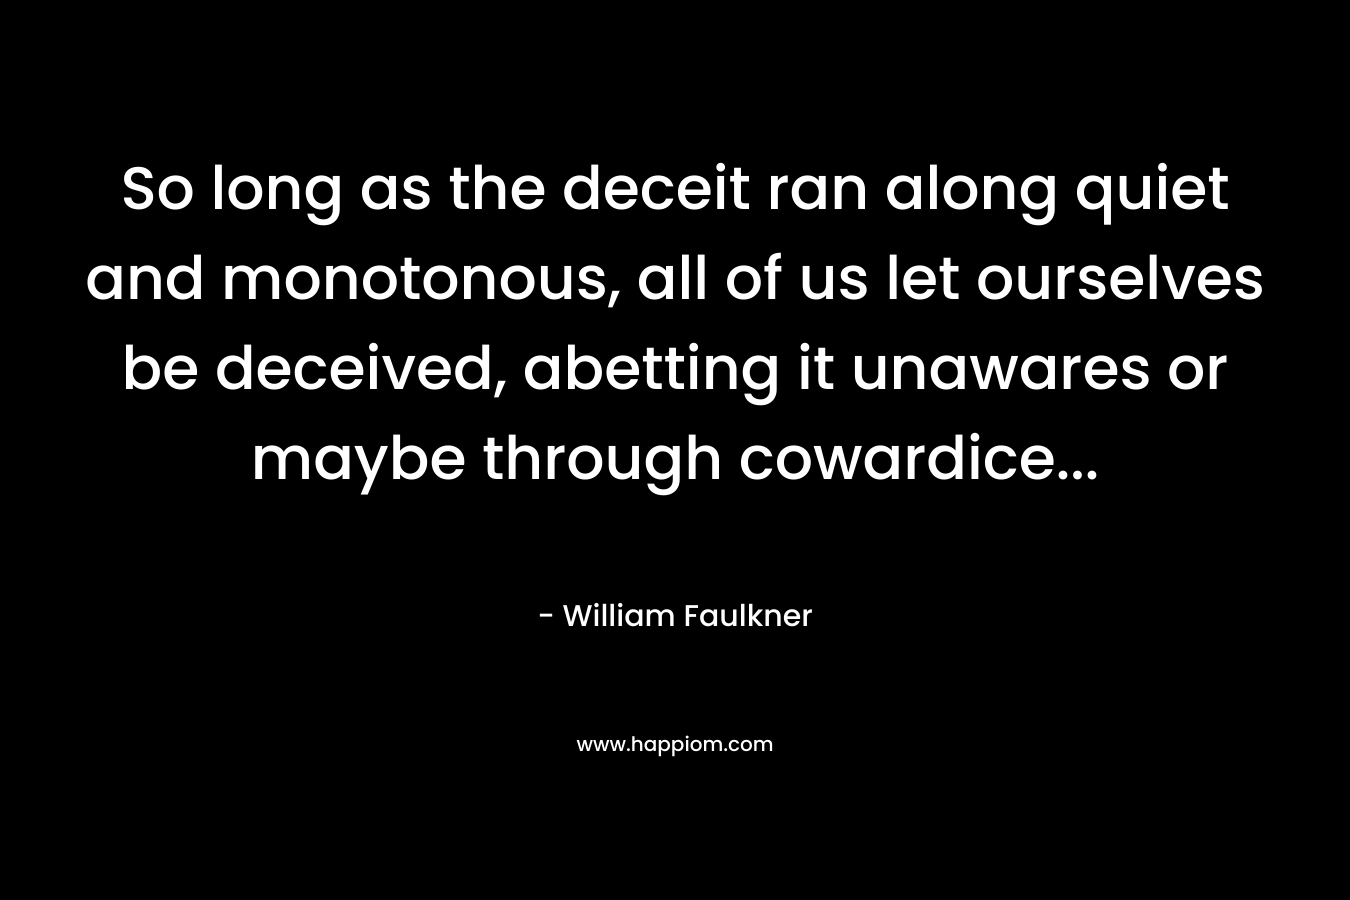 So long as the deceit ran along quiet and monotonous, all of us let ourselves be deceived, abetting it unawares or maybe through cowardice… – William Faulkner